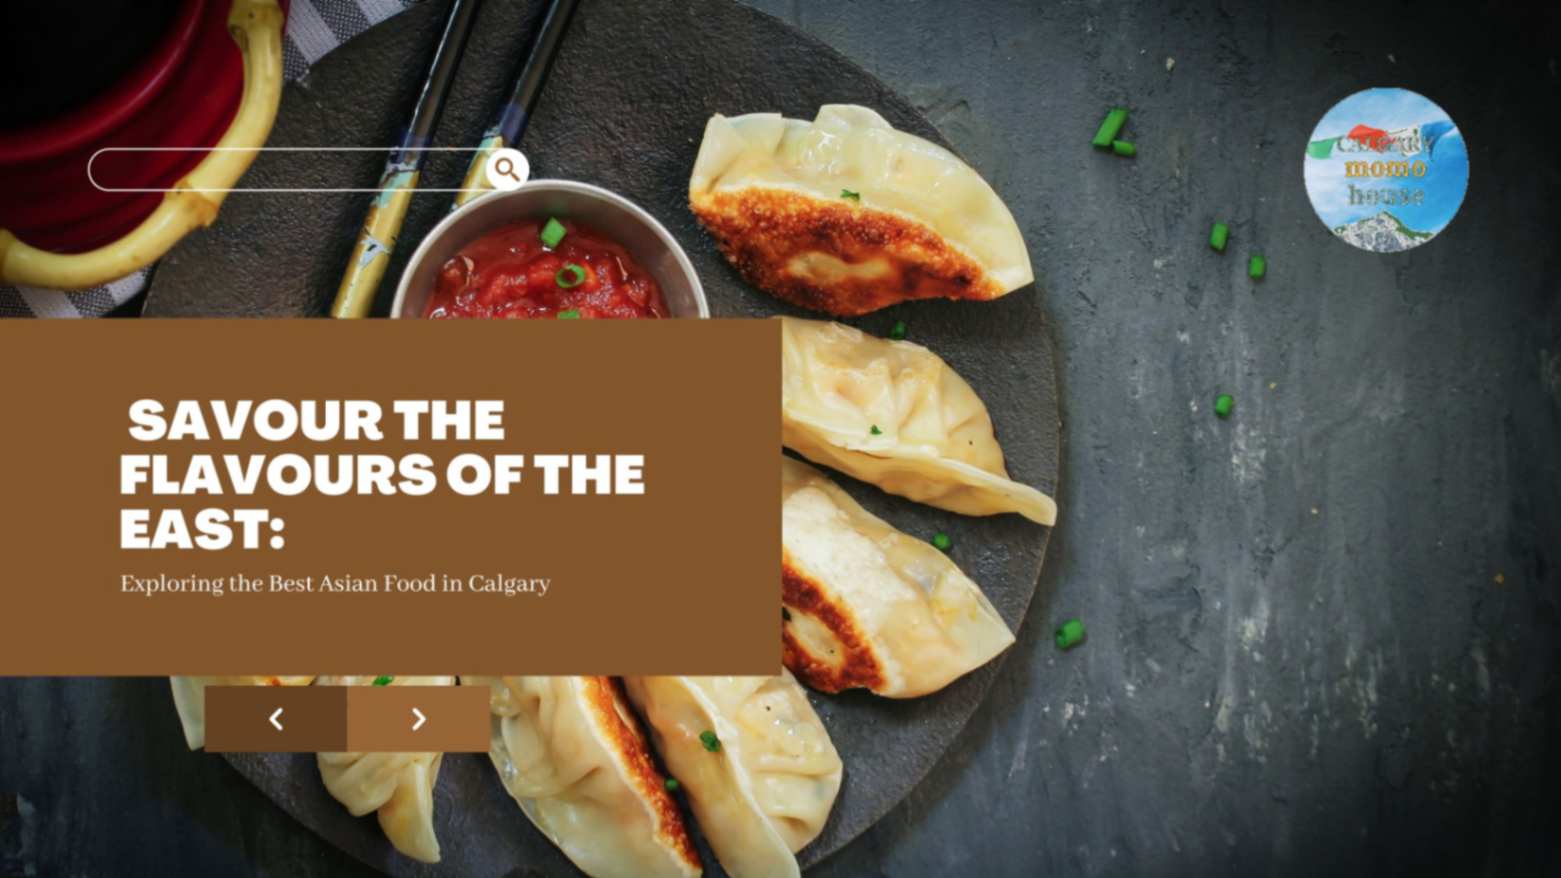 Savour the Flavours of the East: Exploring the Best Asian Food in Calgary!